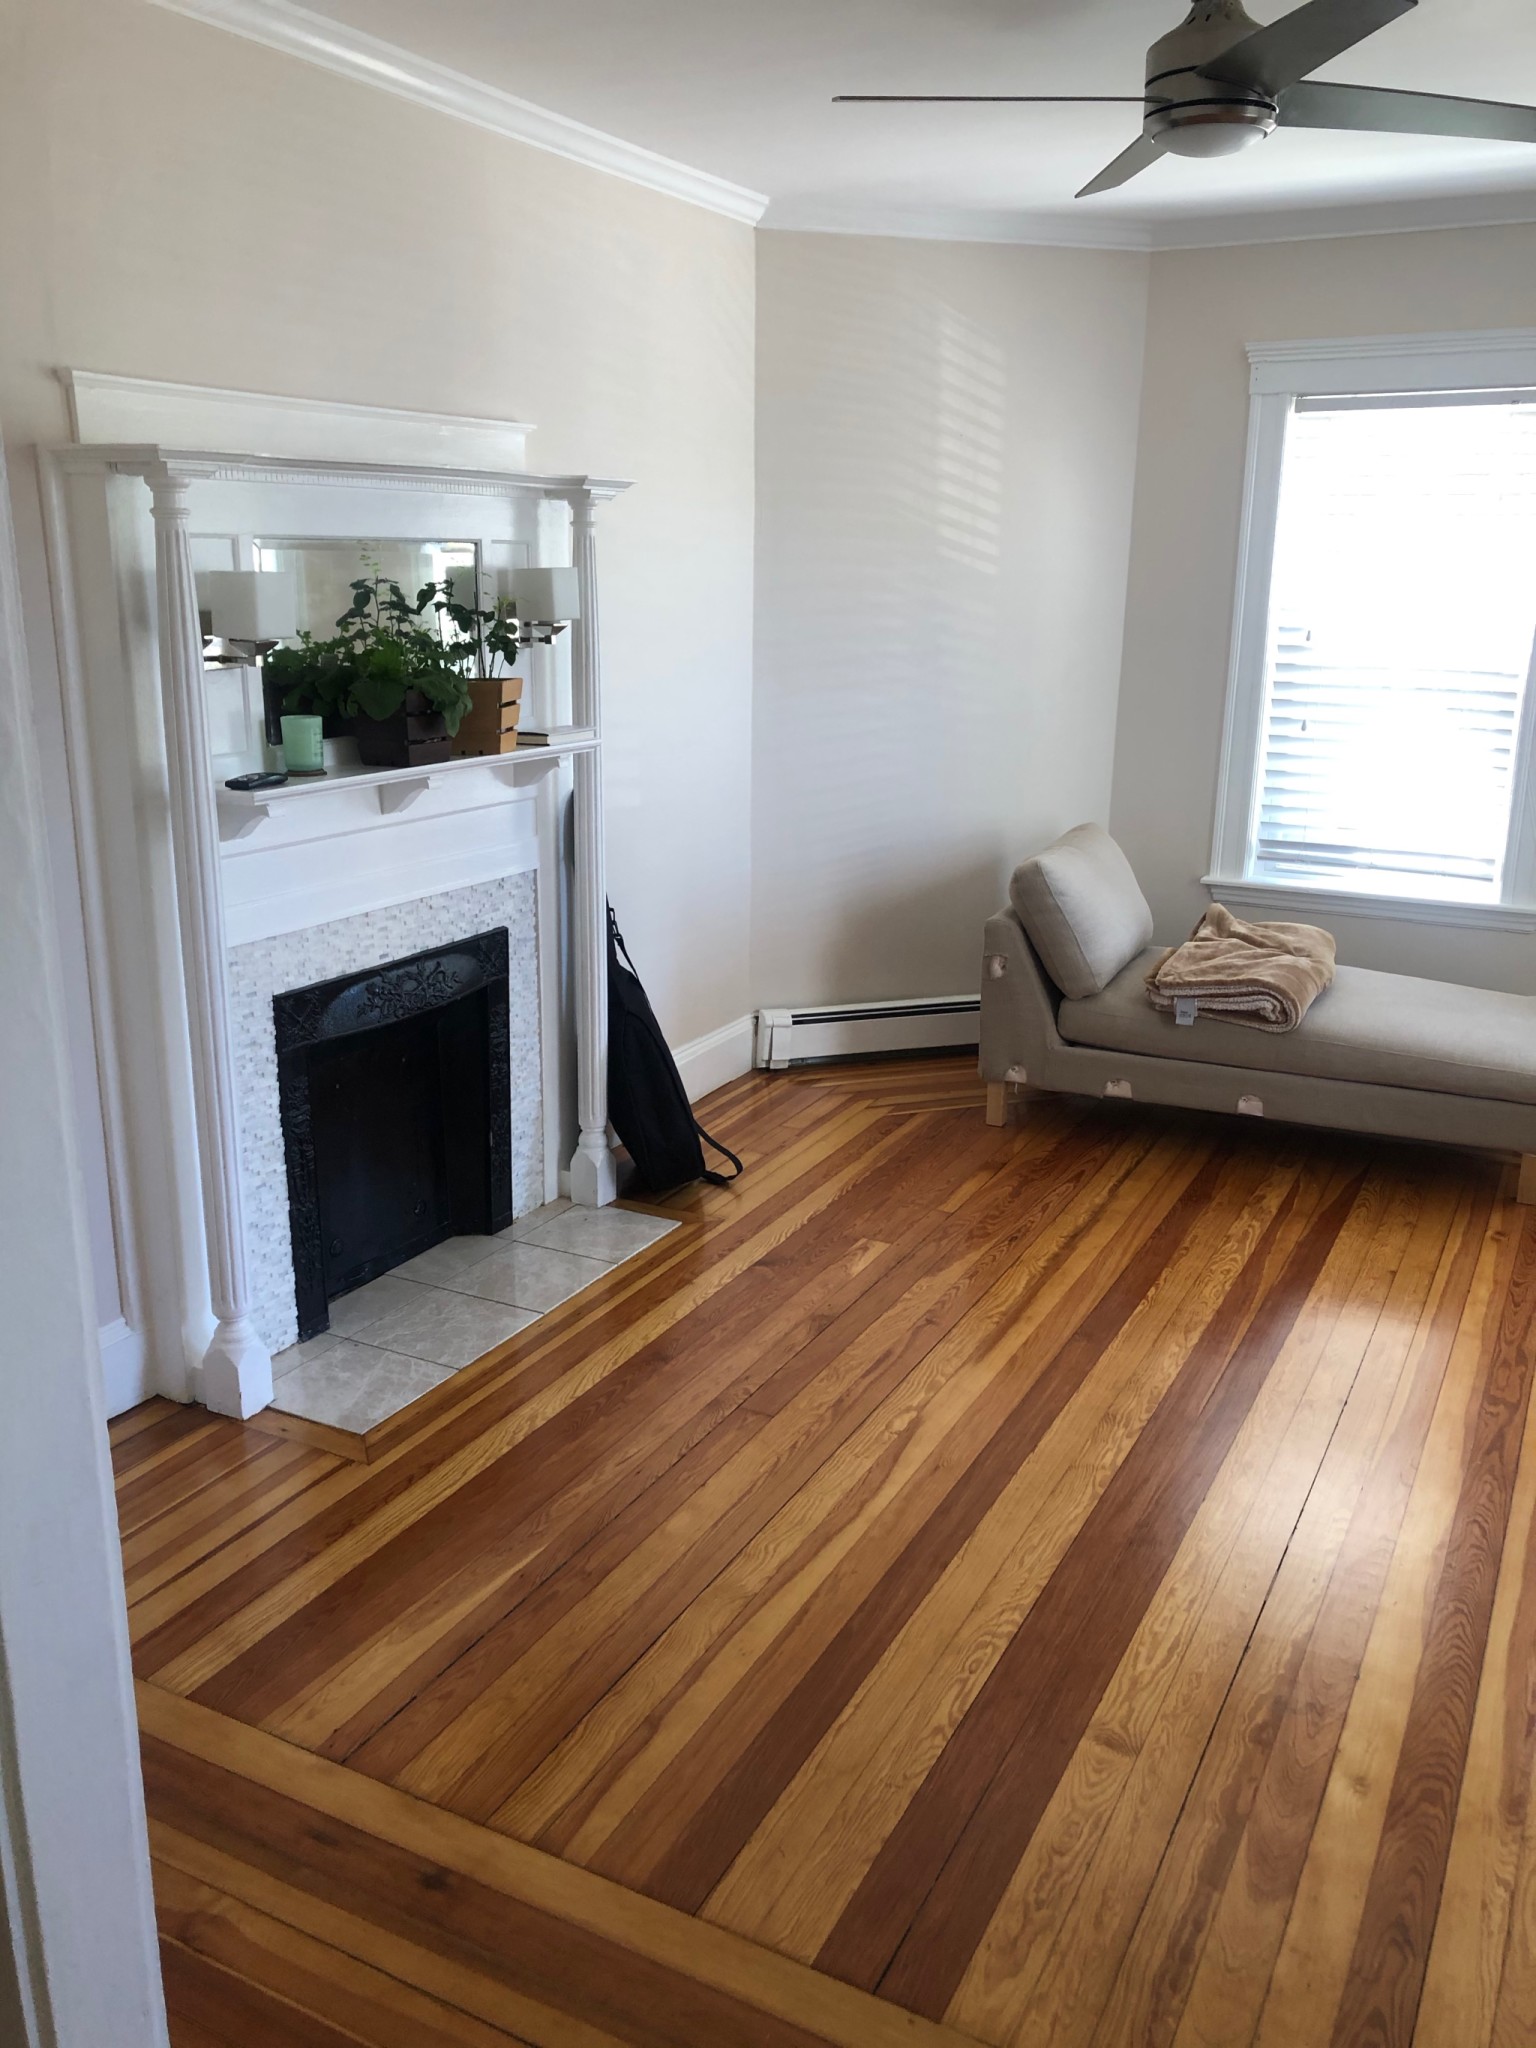 Photos of apartment on Union St.,Watertown MA 02472